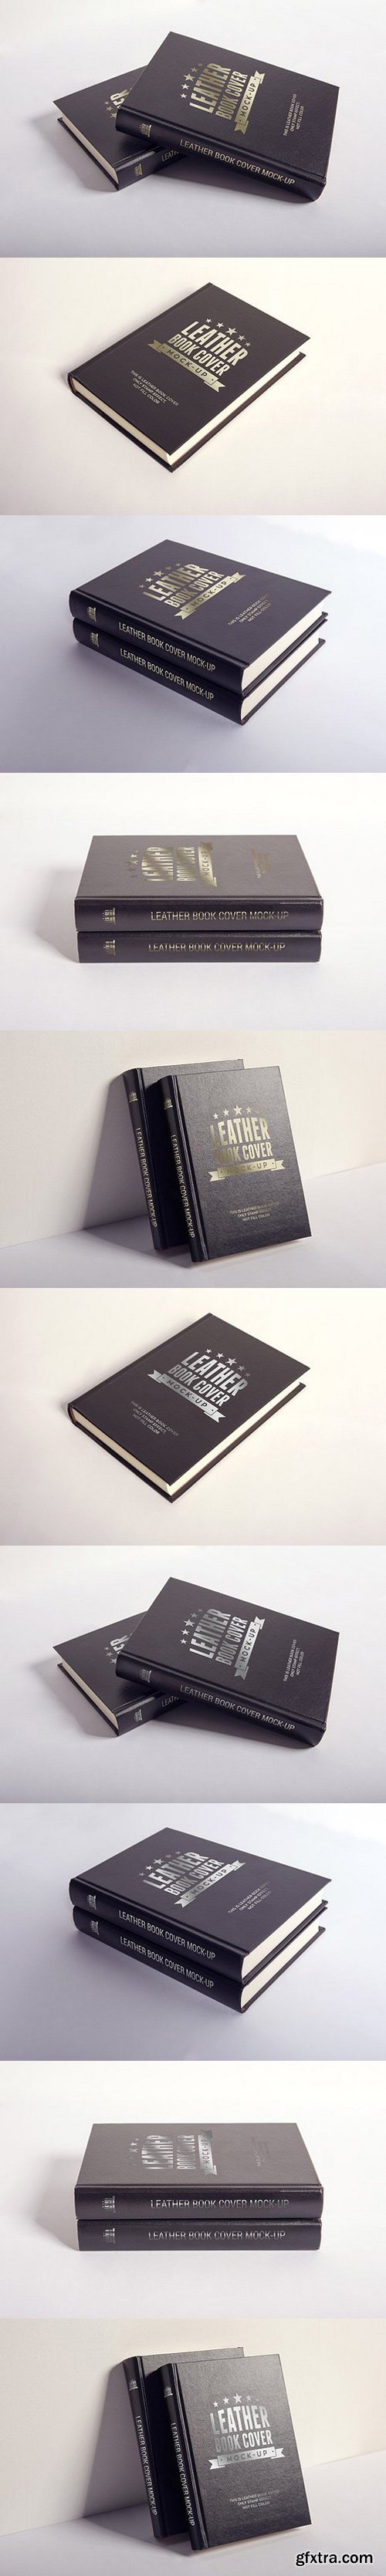 CM - LEATHER BOOK COVER MOCK-UP 1420568